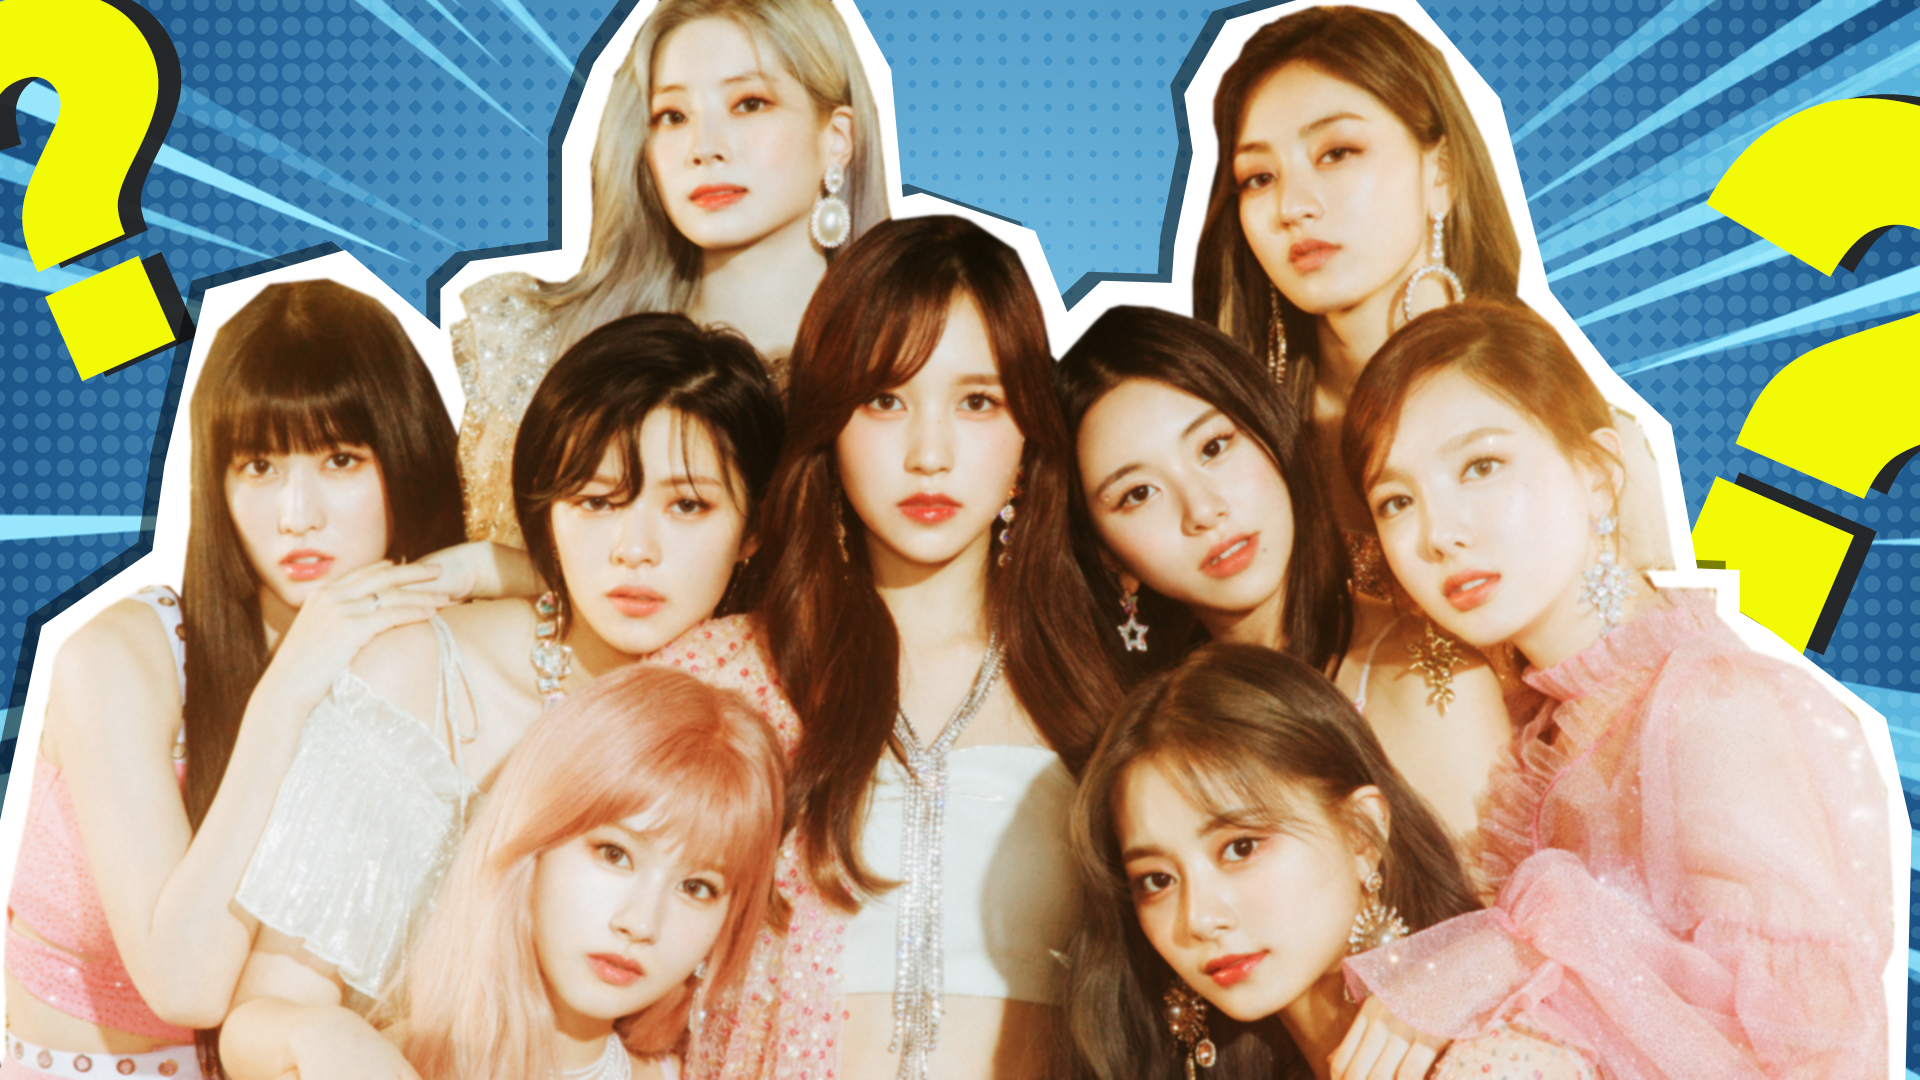 Which TWICE Member Are You? 1 of 9 Accurate Match Quiz